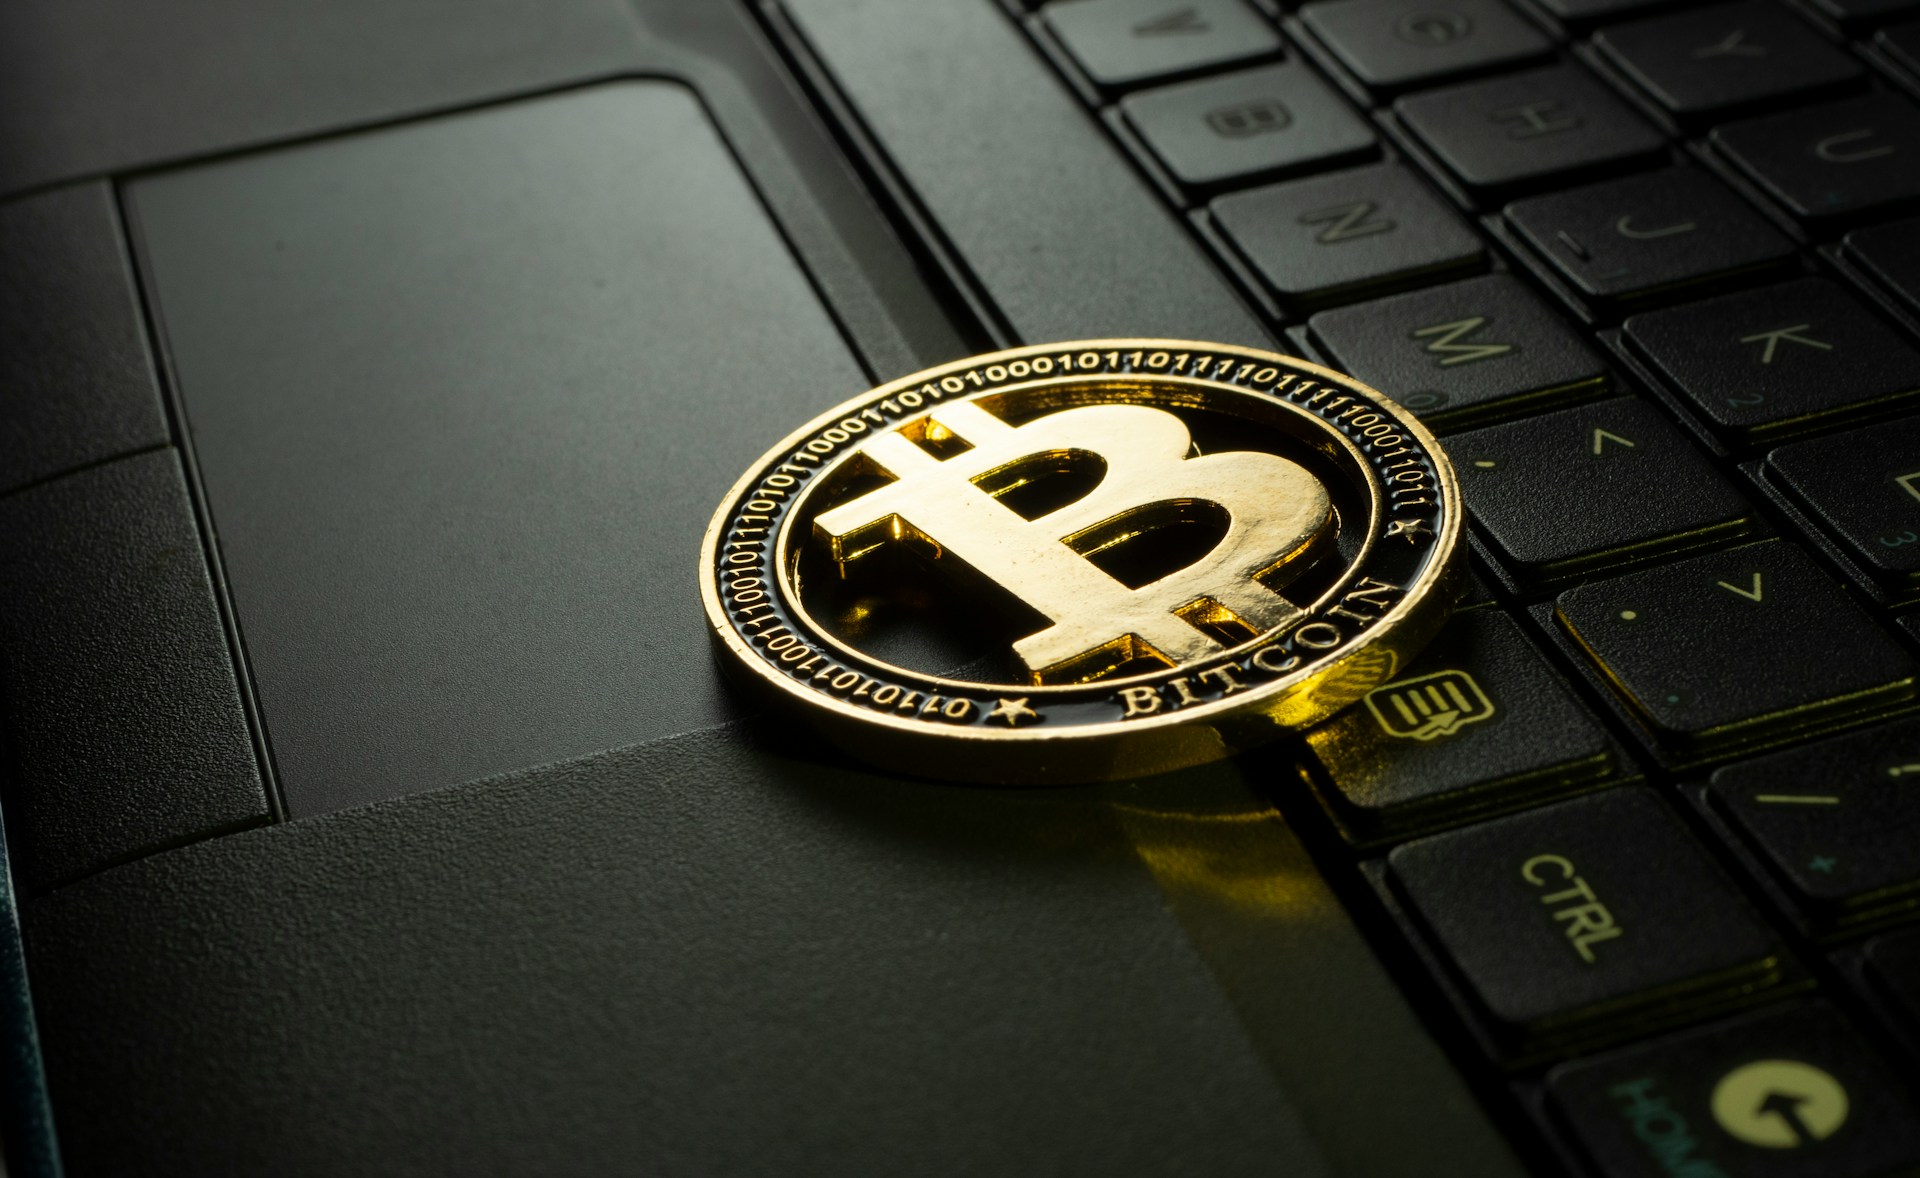 Unless you include your cryptocurrency in your estate plan, it could disappear forever. We explain how to protect this important digital asset.